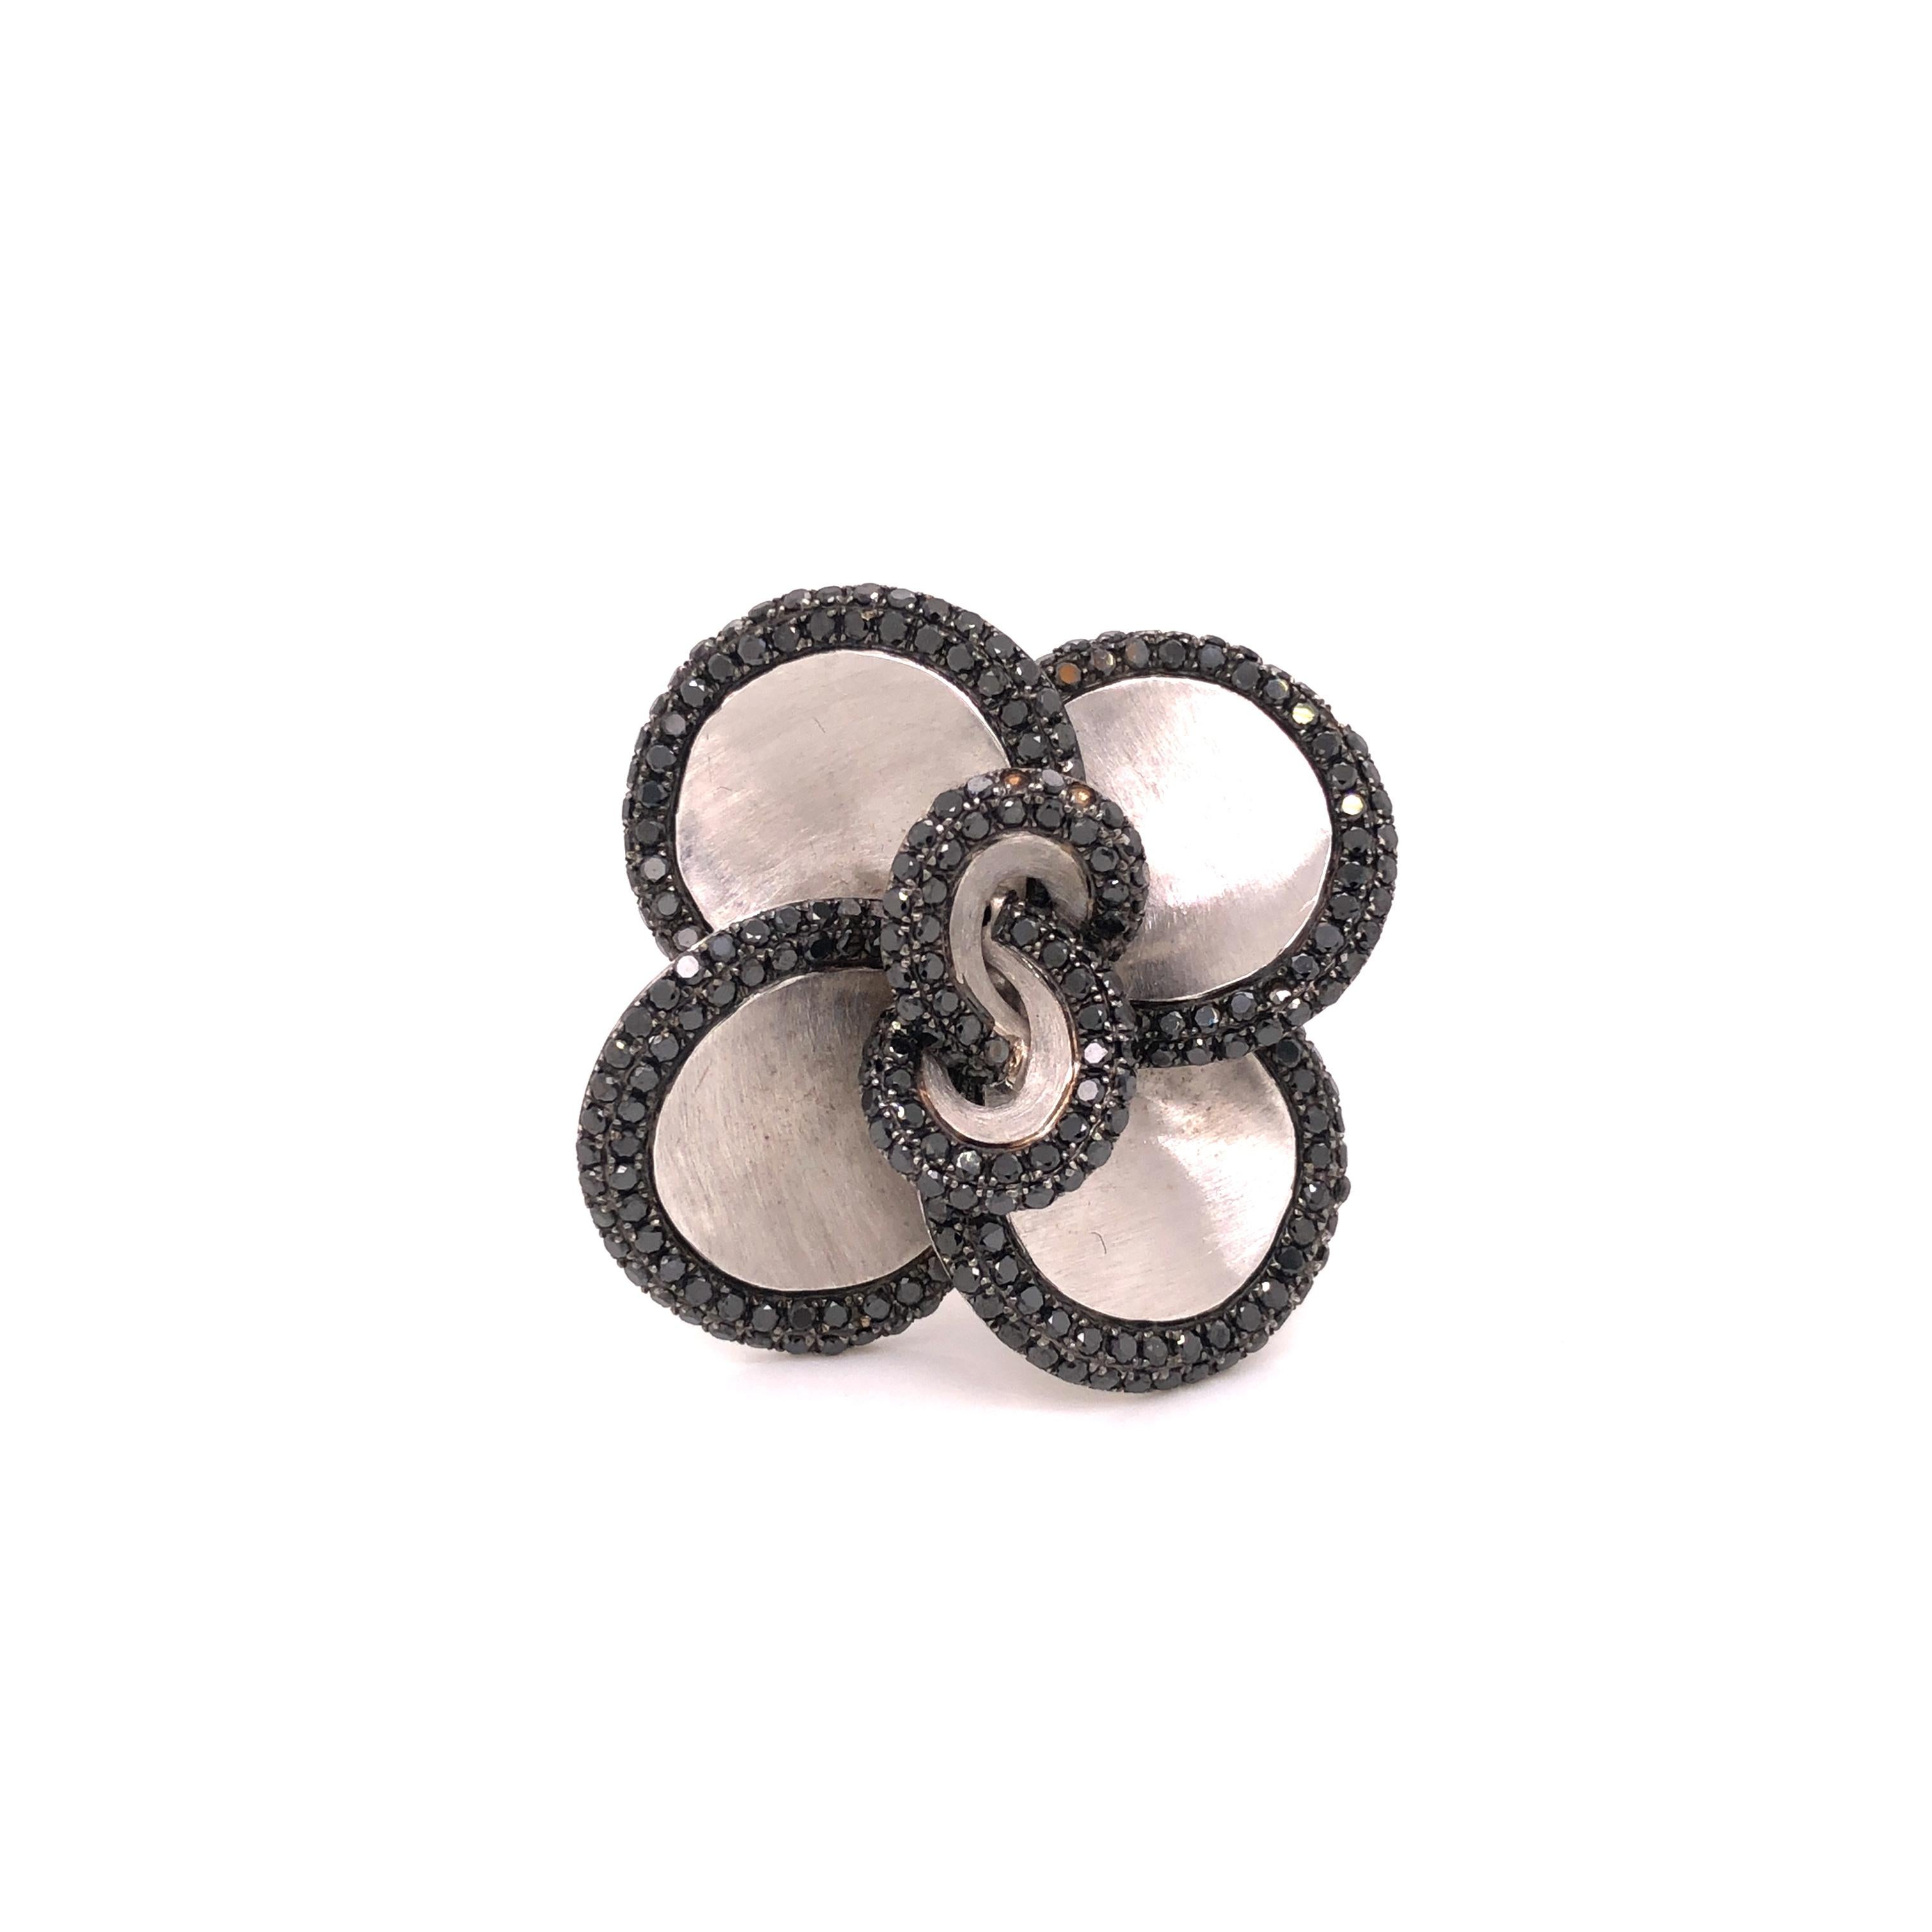 A beautiful floral cocktail ring contains round-cut black diamonds weighing a total of approximately 2.51 carats, set in 14K white gold.

Ring size 7

